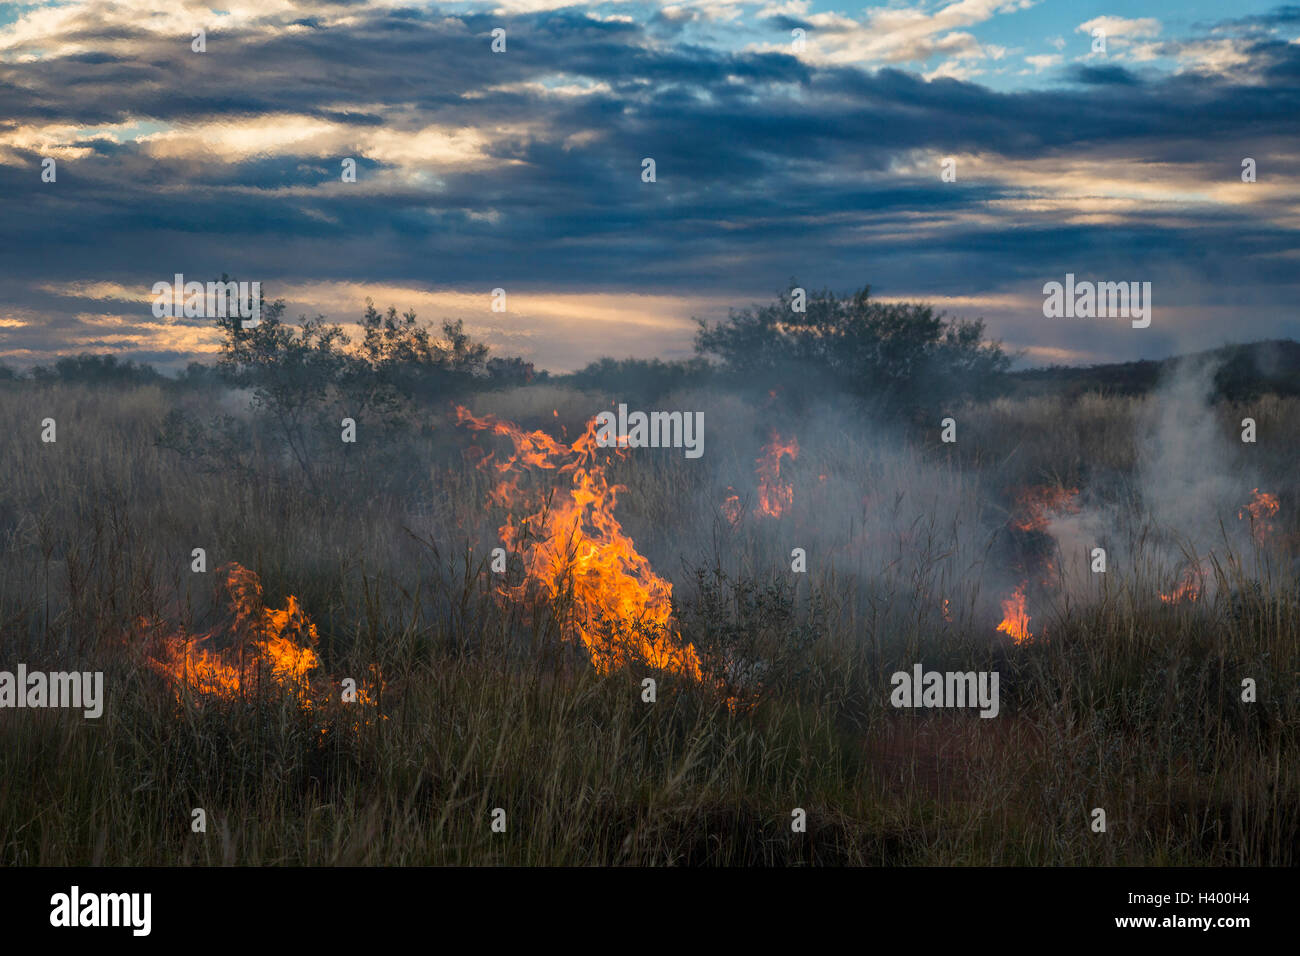 Fire on grassy field against cloudy sky during sunset, Newman, Western Australia, Australia Stock Photo